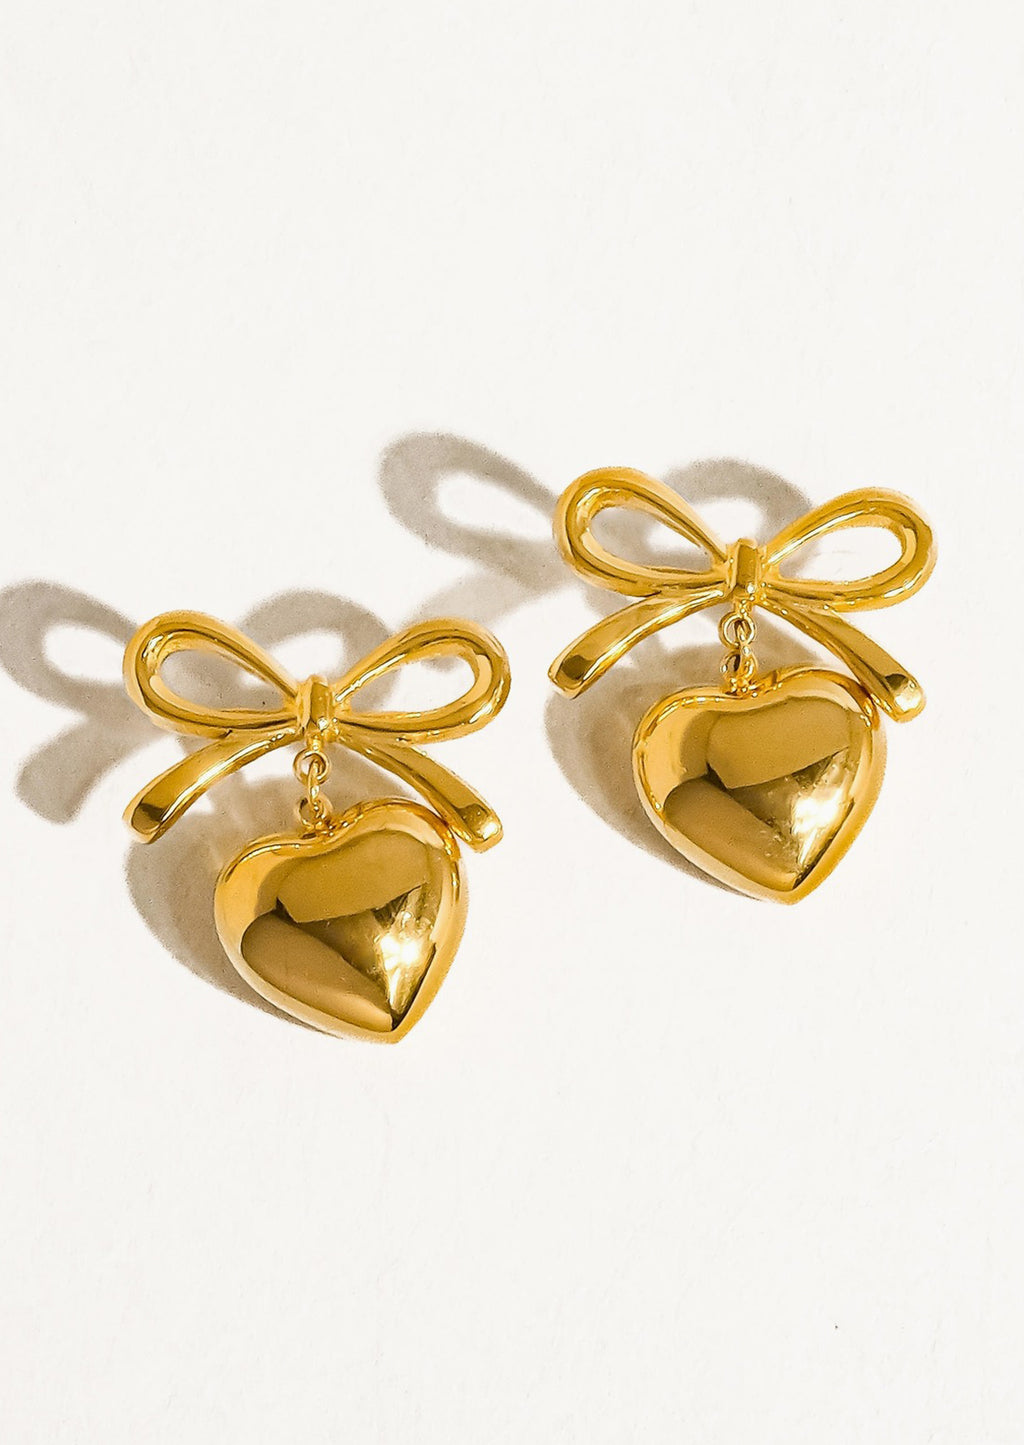 2: A pair of gold earrings with dangling heart charm and bow shaped post.